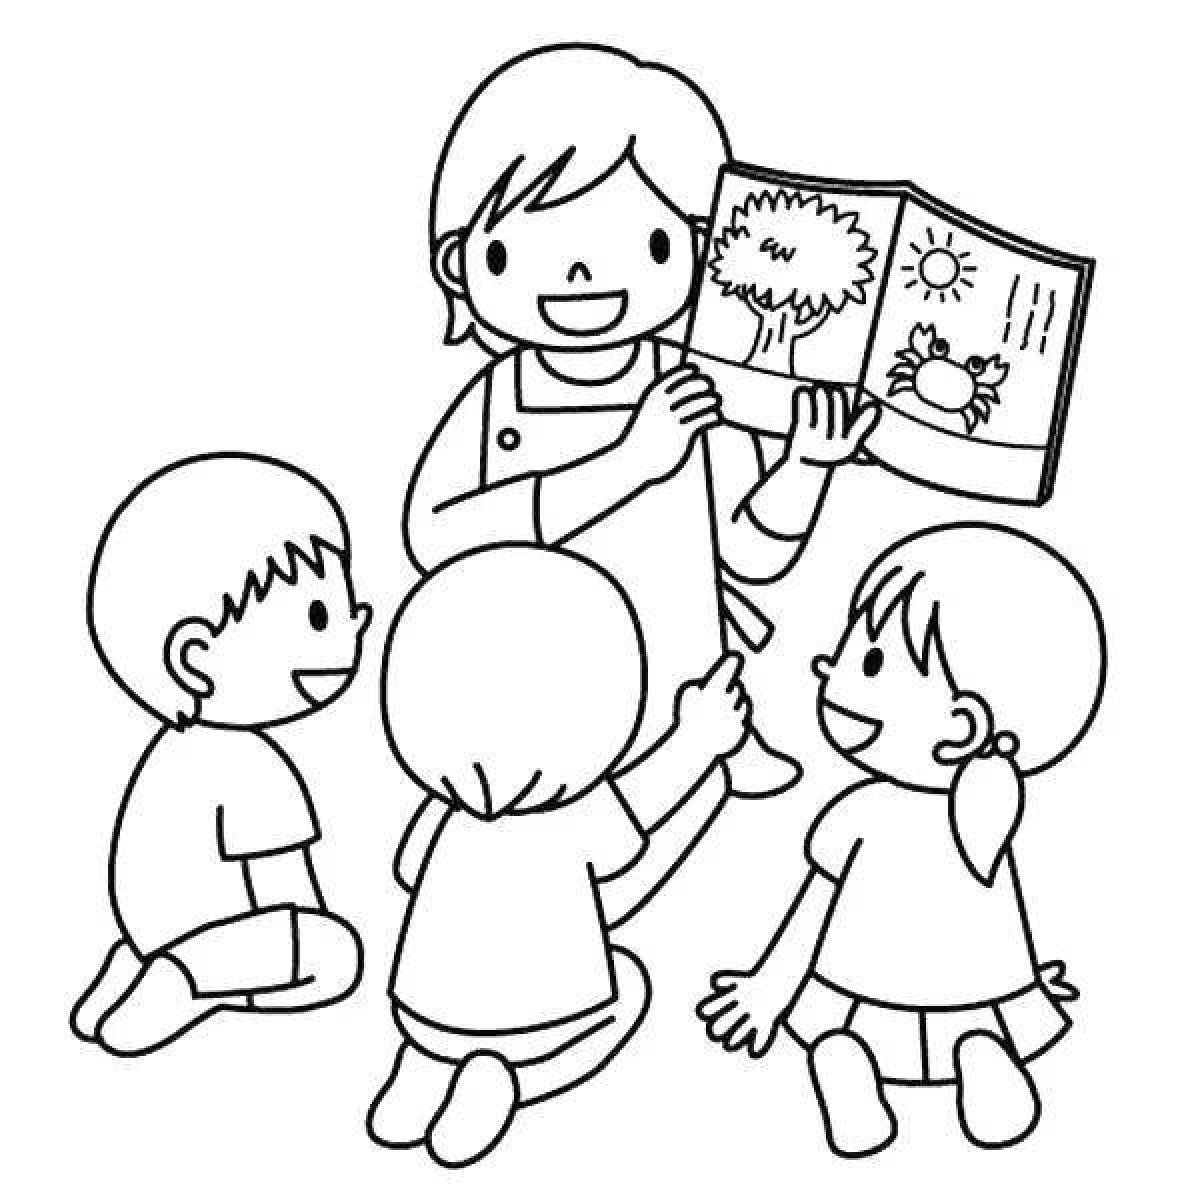 Educational coloring book for toddlers